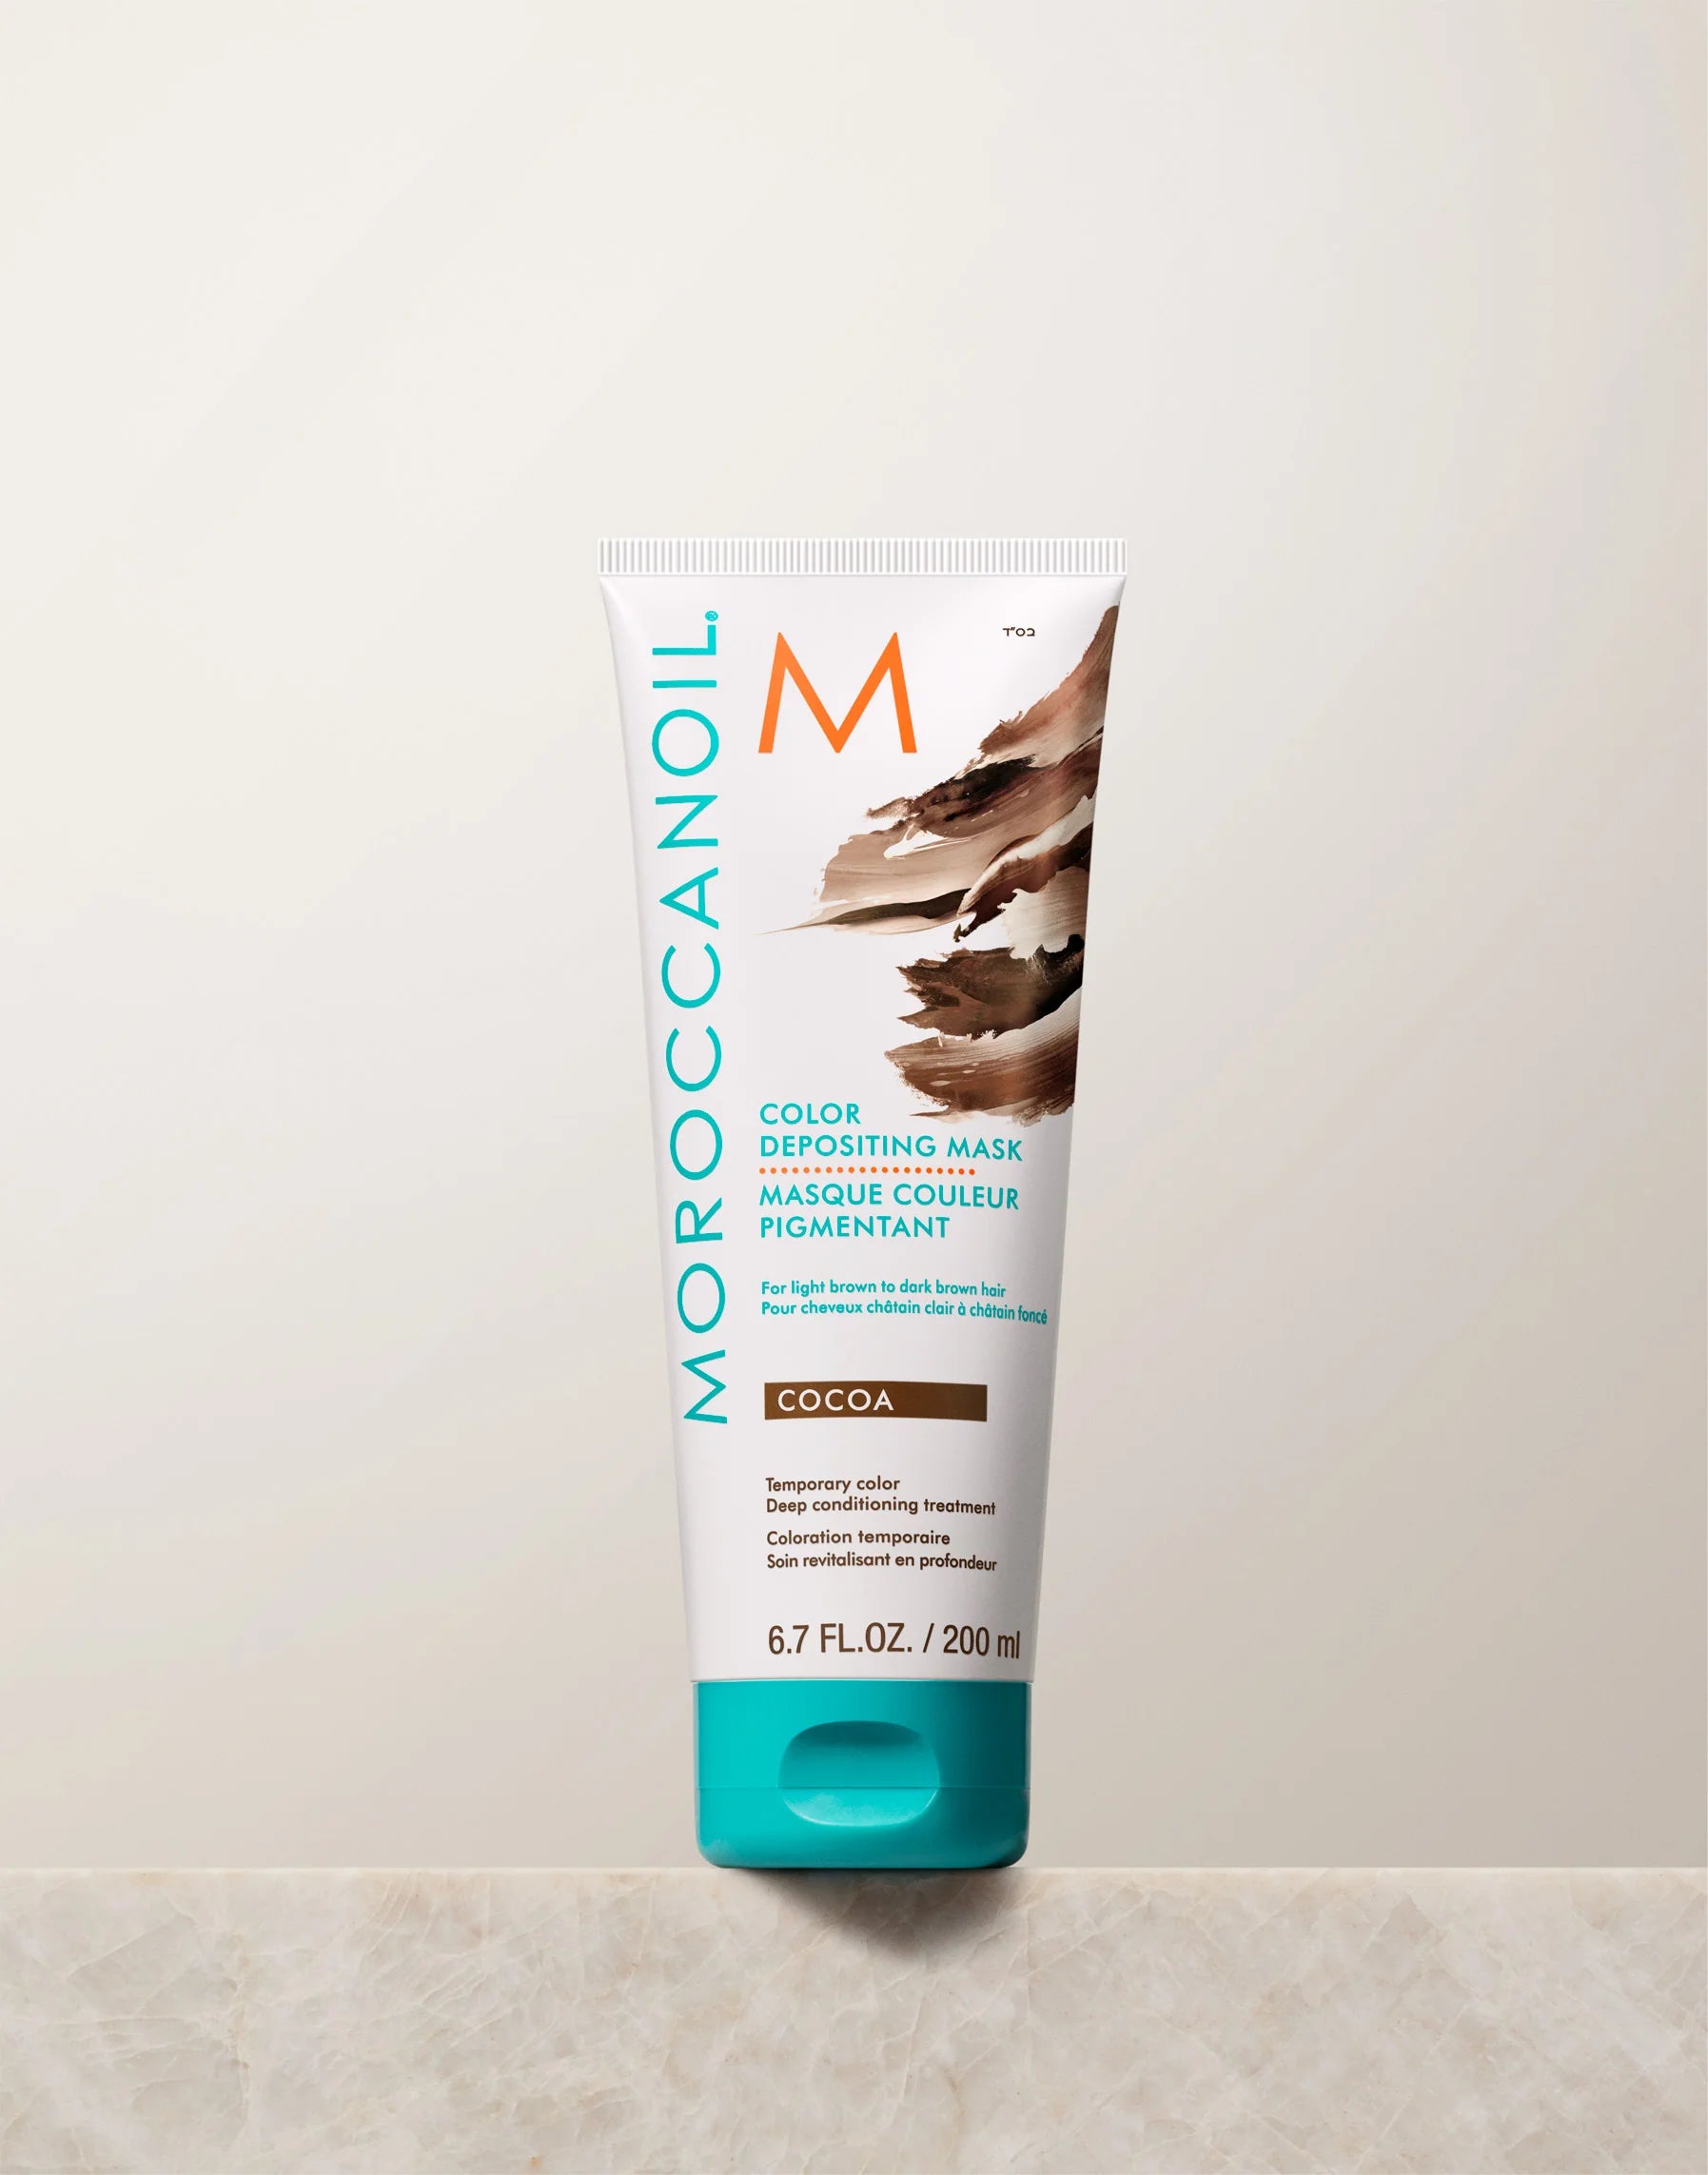 Tinted mask Cocoa (MoroccanOil Cocoa Color Depositing Mask)